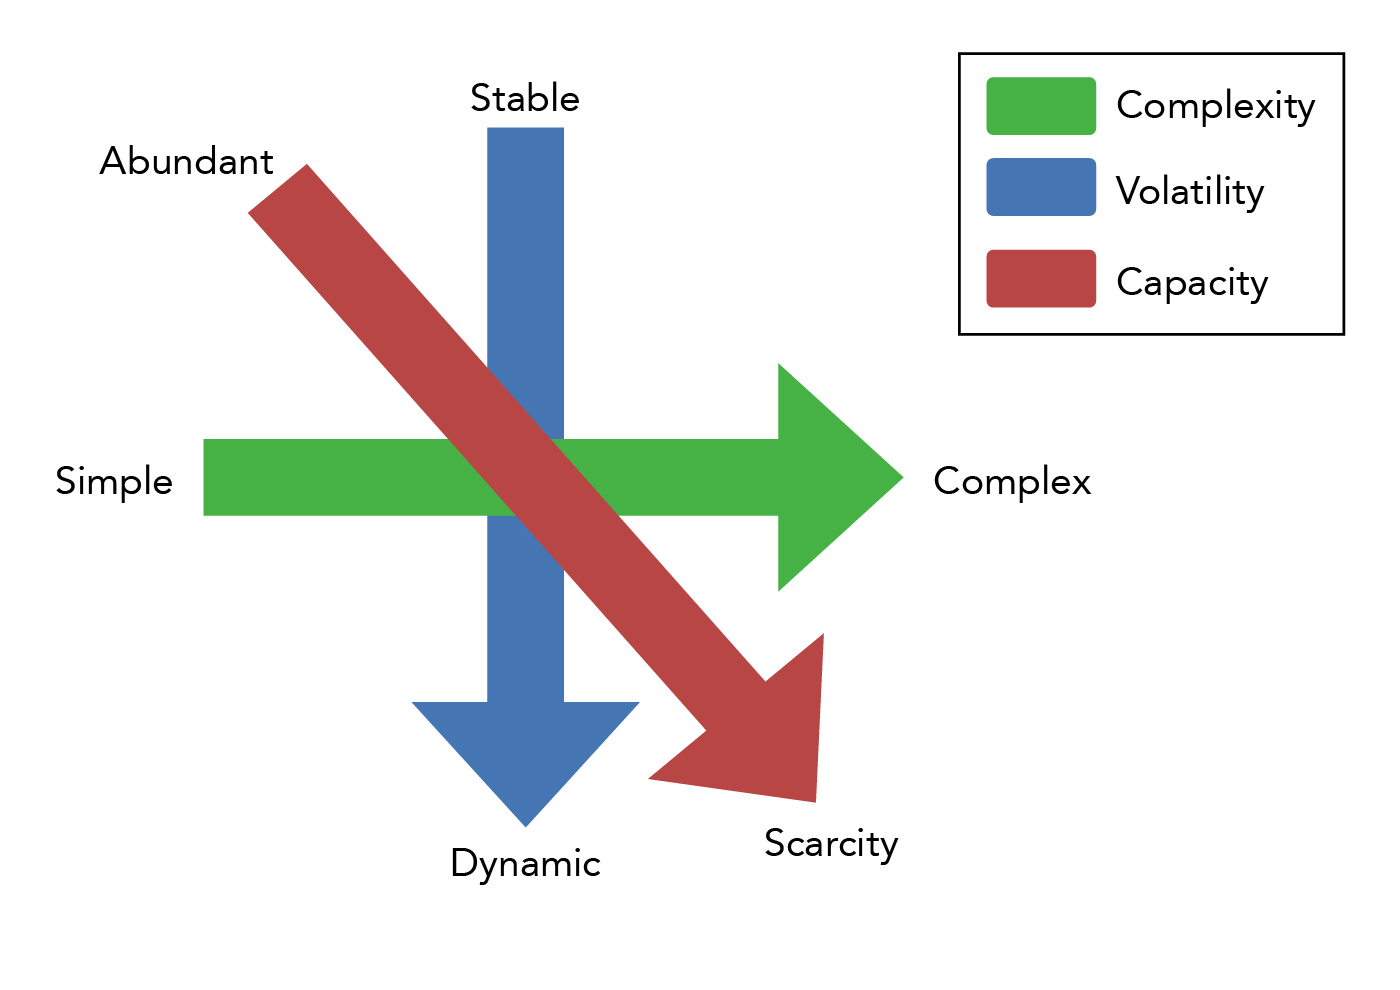 Three dimensions of environmental uncertainty. On the x-axis is complexity, ranging from simple to complex. On the y-axis is volatility, ranging from stable to dynamic. On the z-axis is capacity, ranging from abundant to scarce.